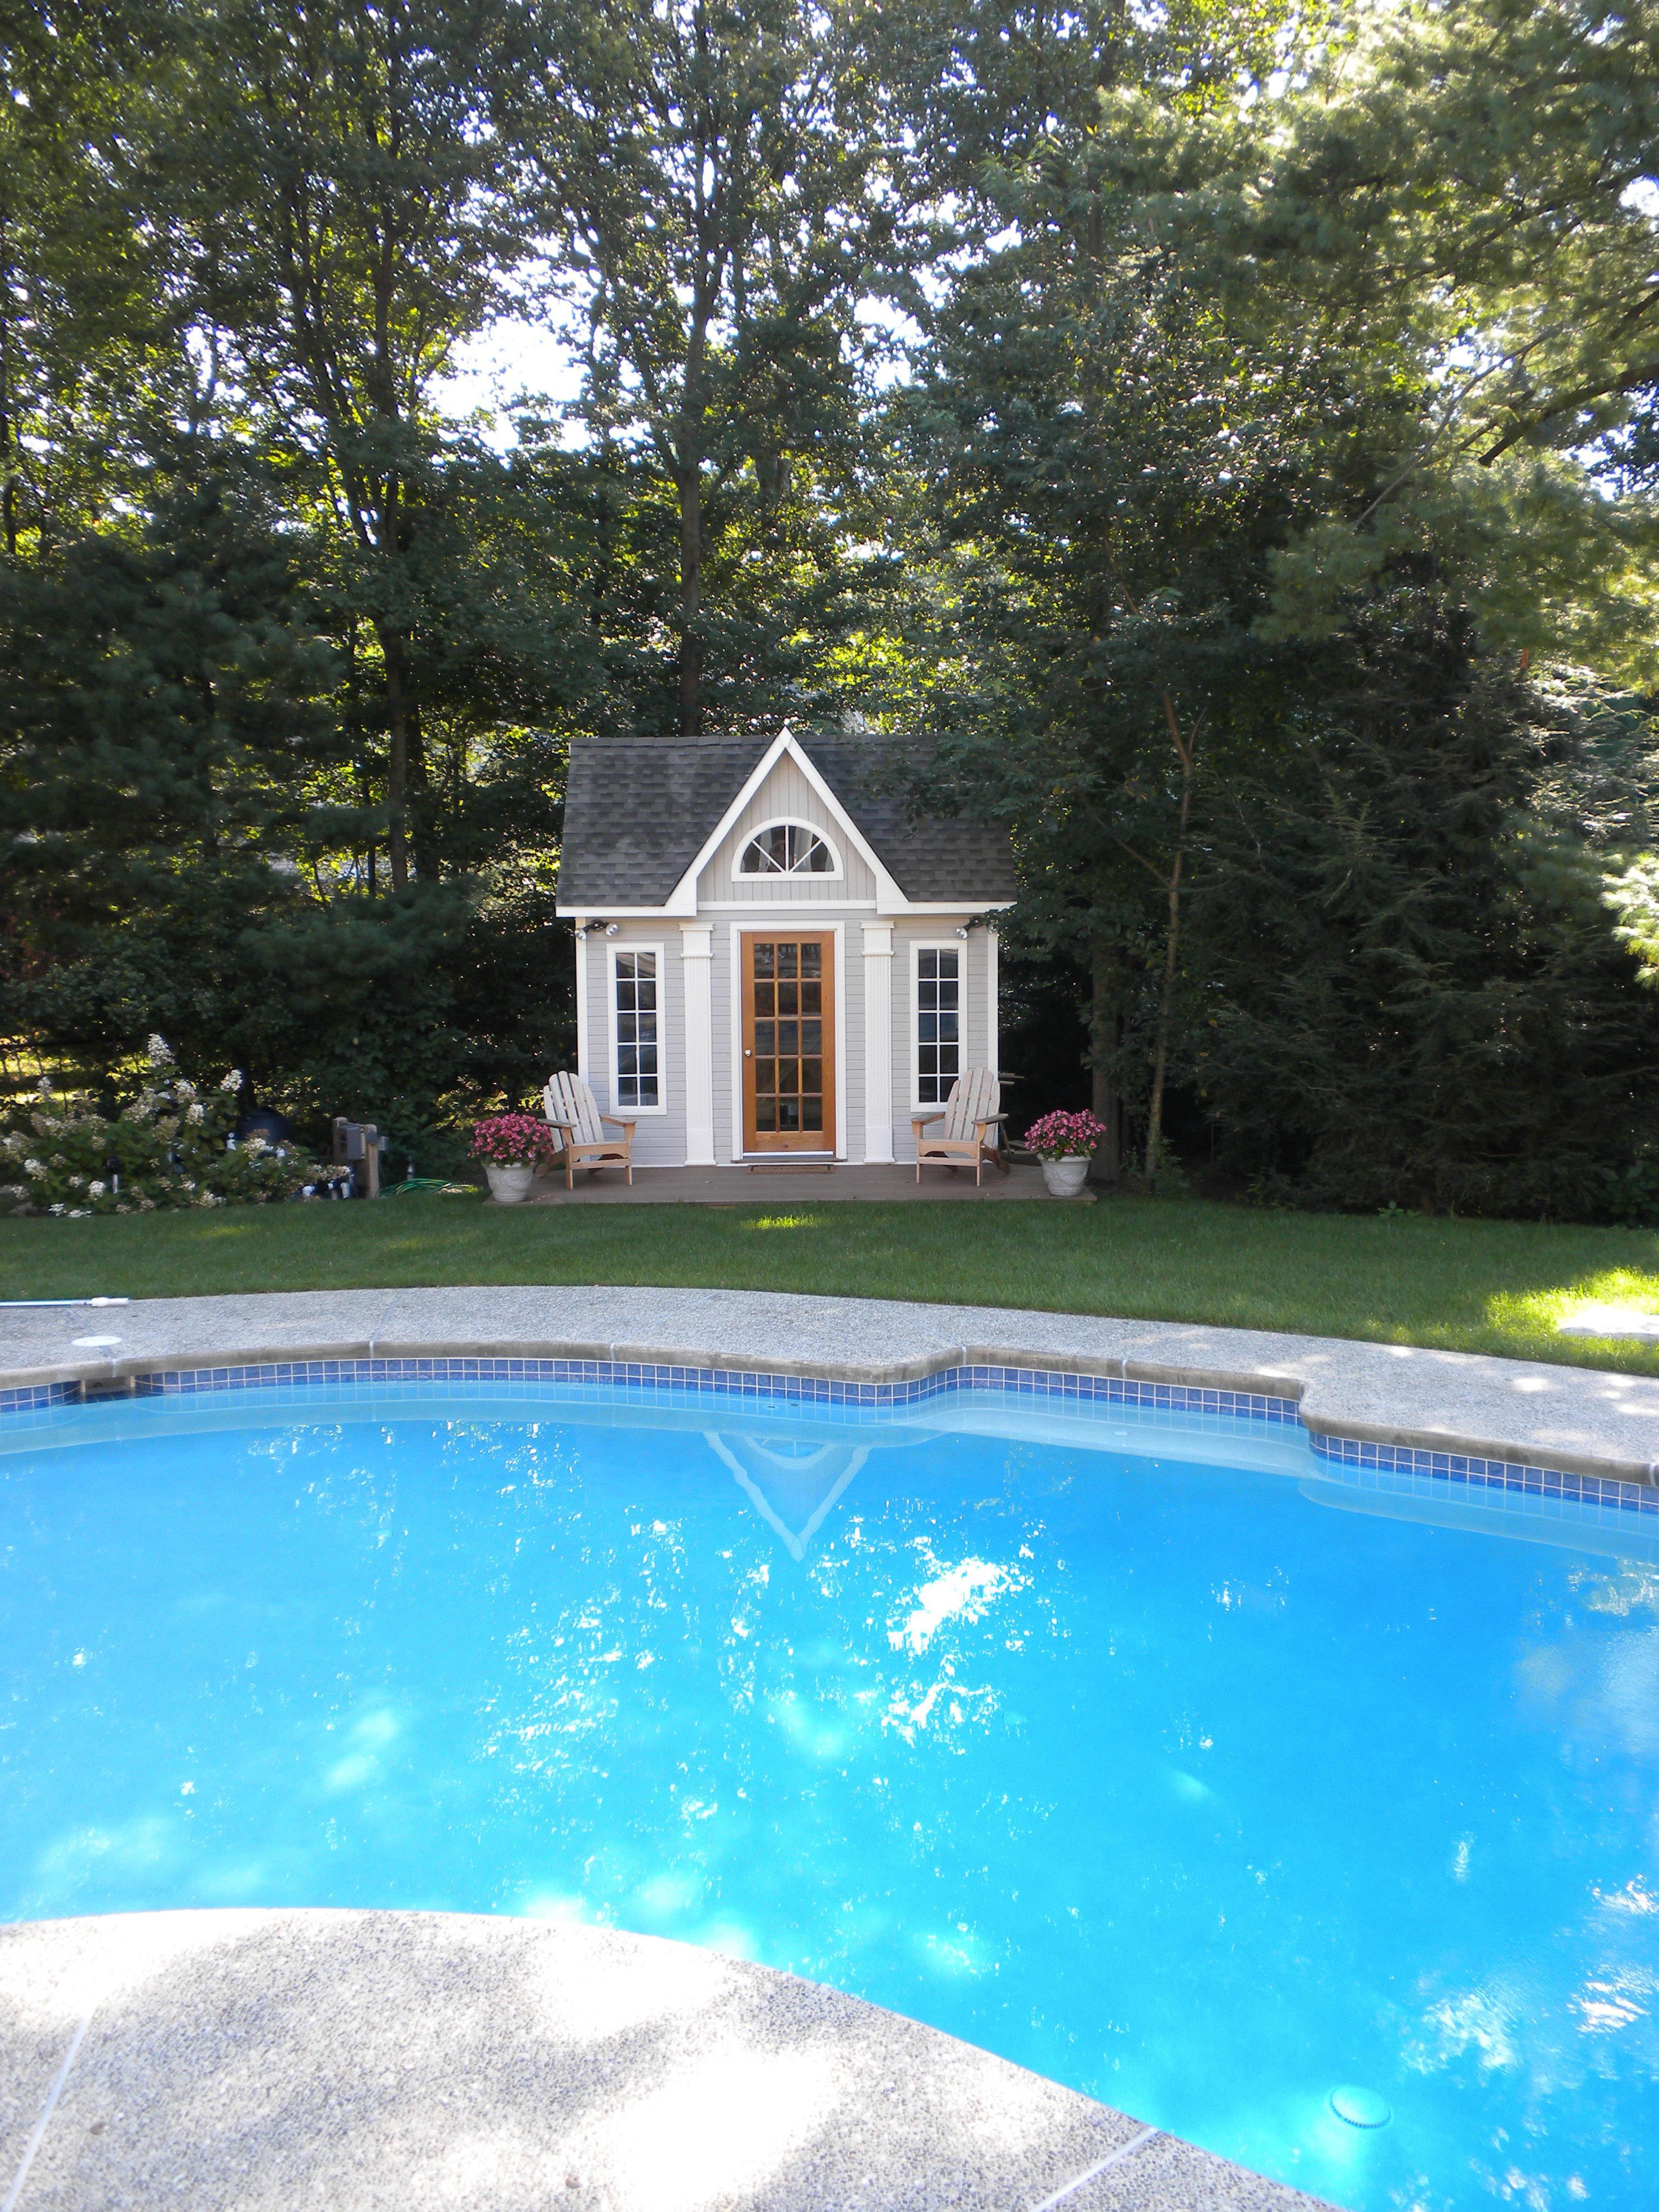 Copper Creek 10x12 workshop with arch window in Andover Massachusetts. ID number 206030-4